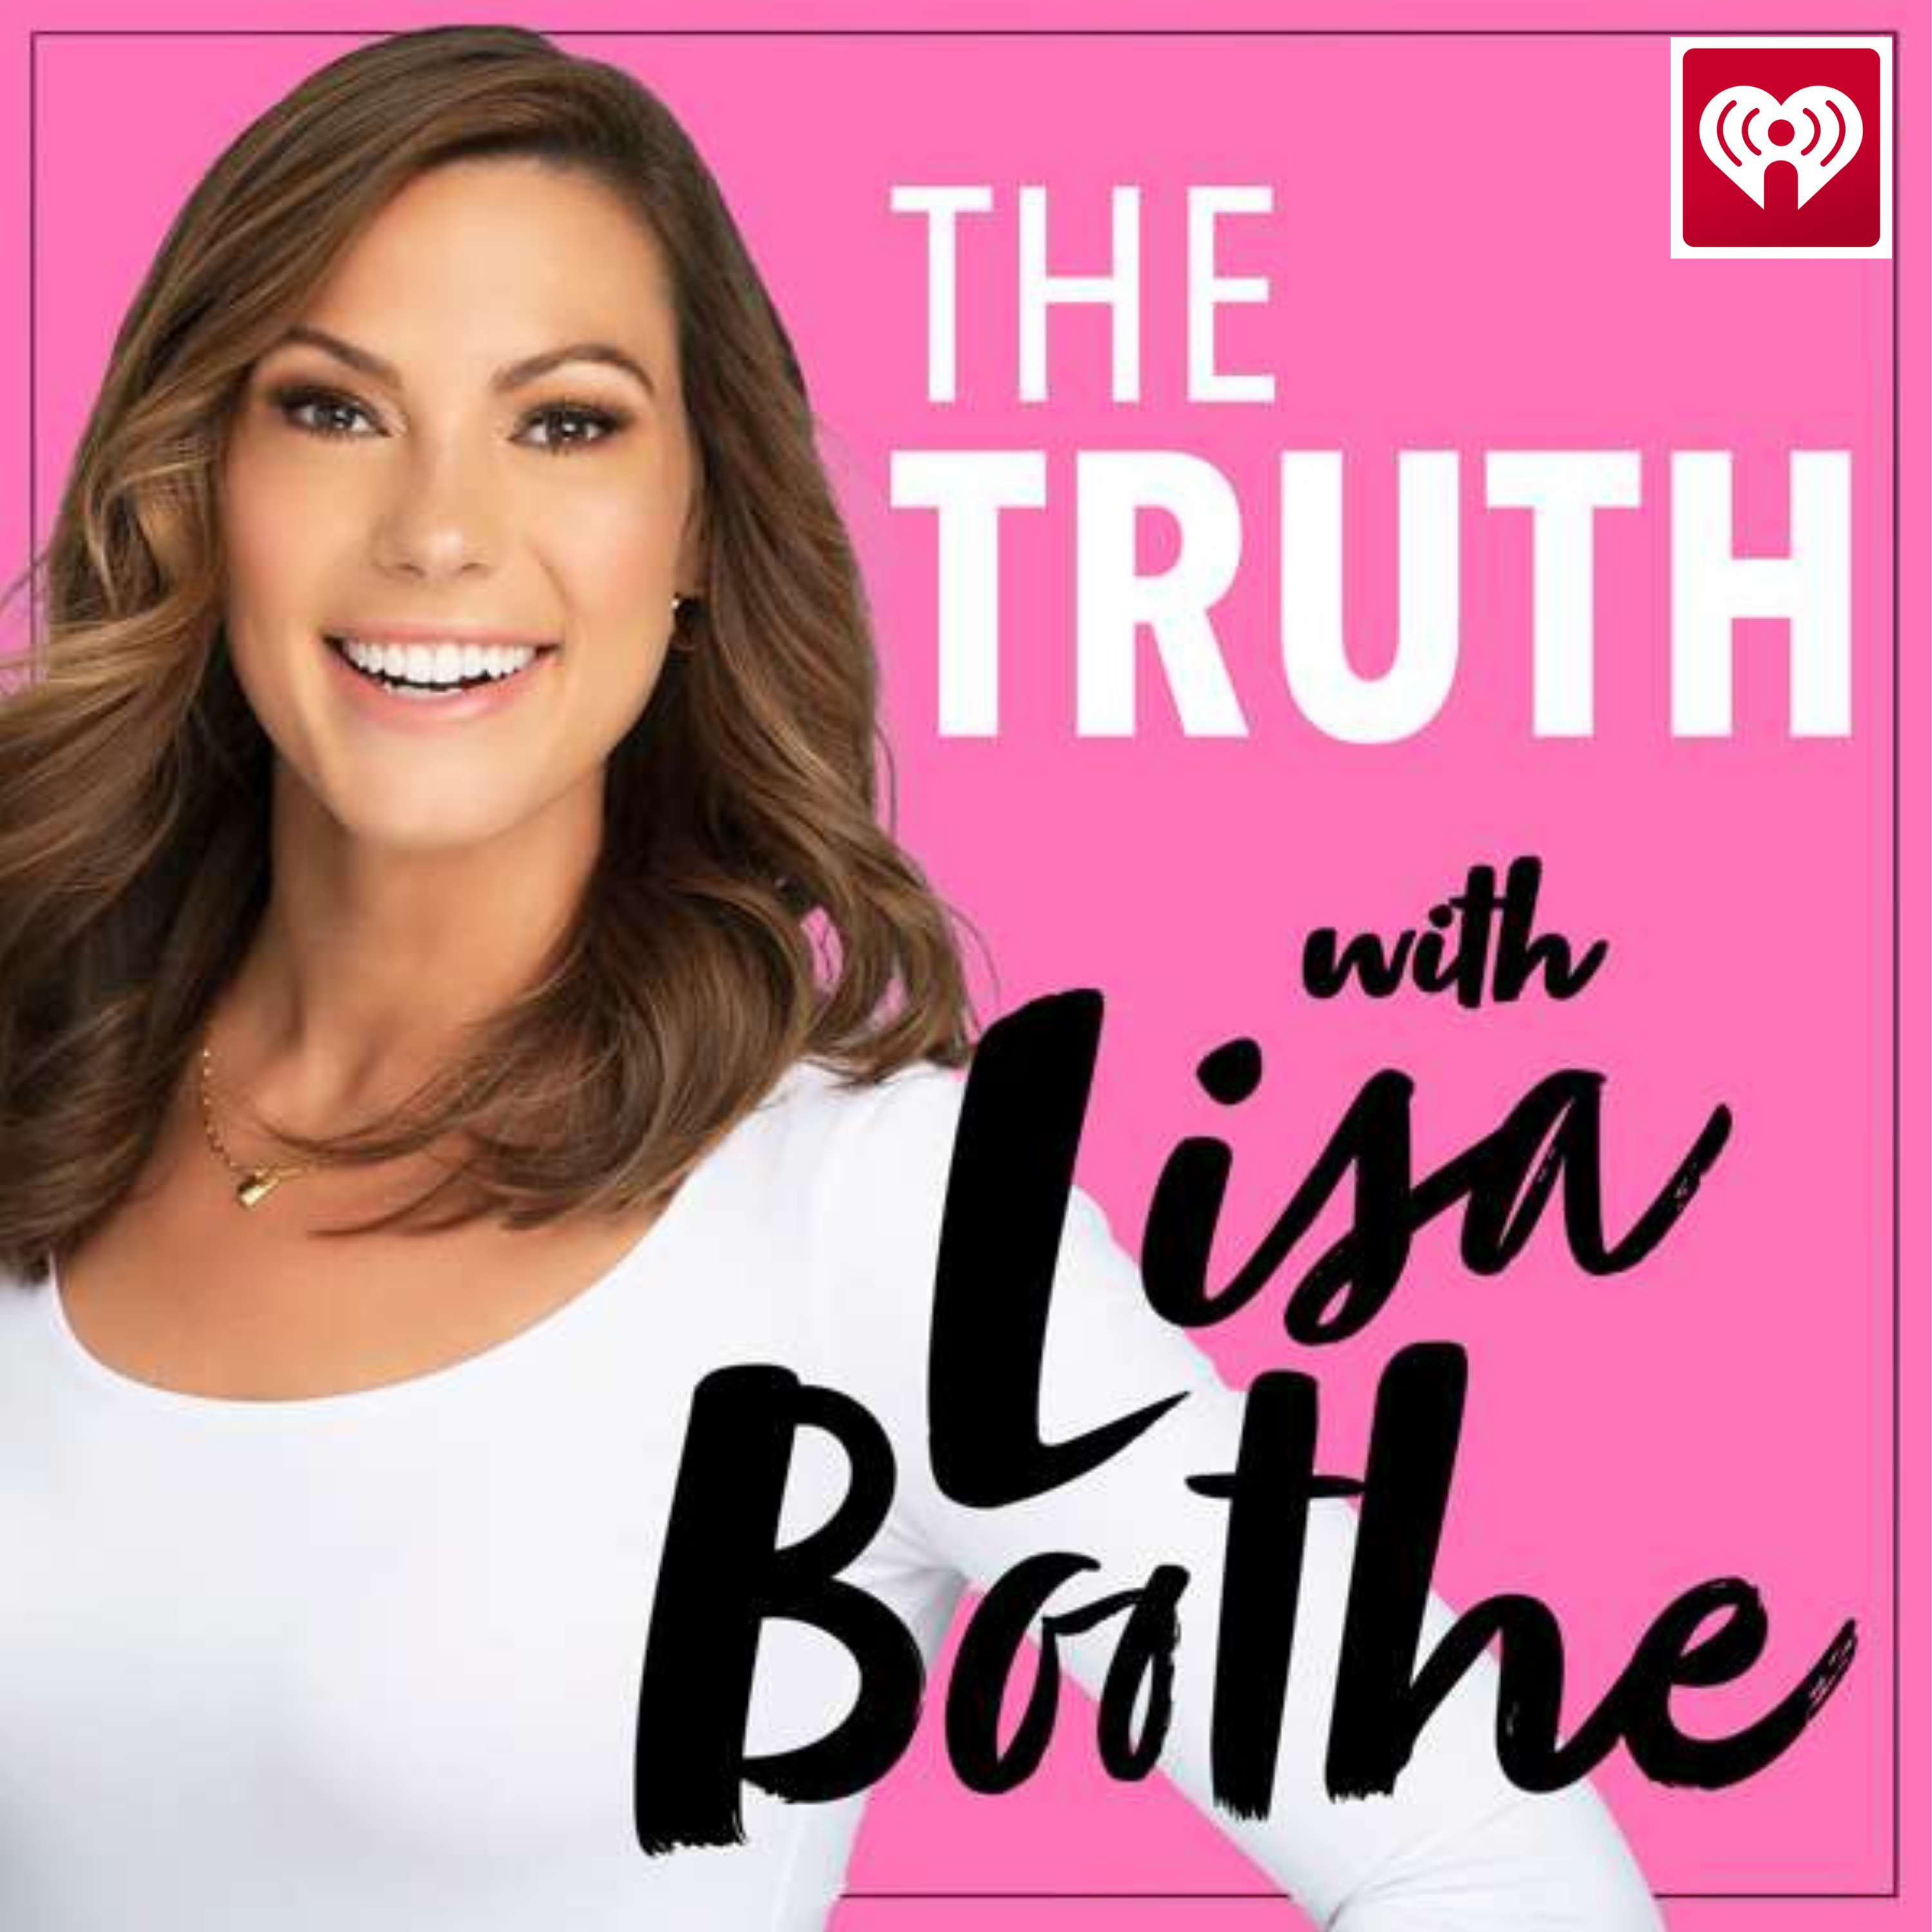 The Truth with Lisa Boothe: The Money Behind Transitioning Children